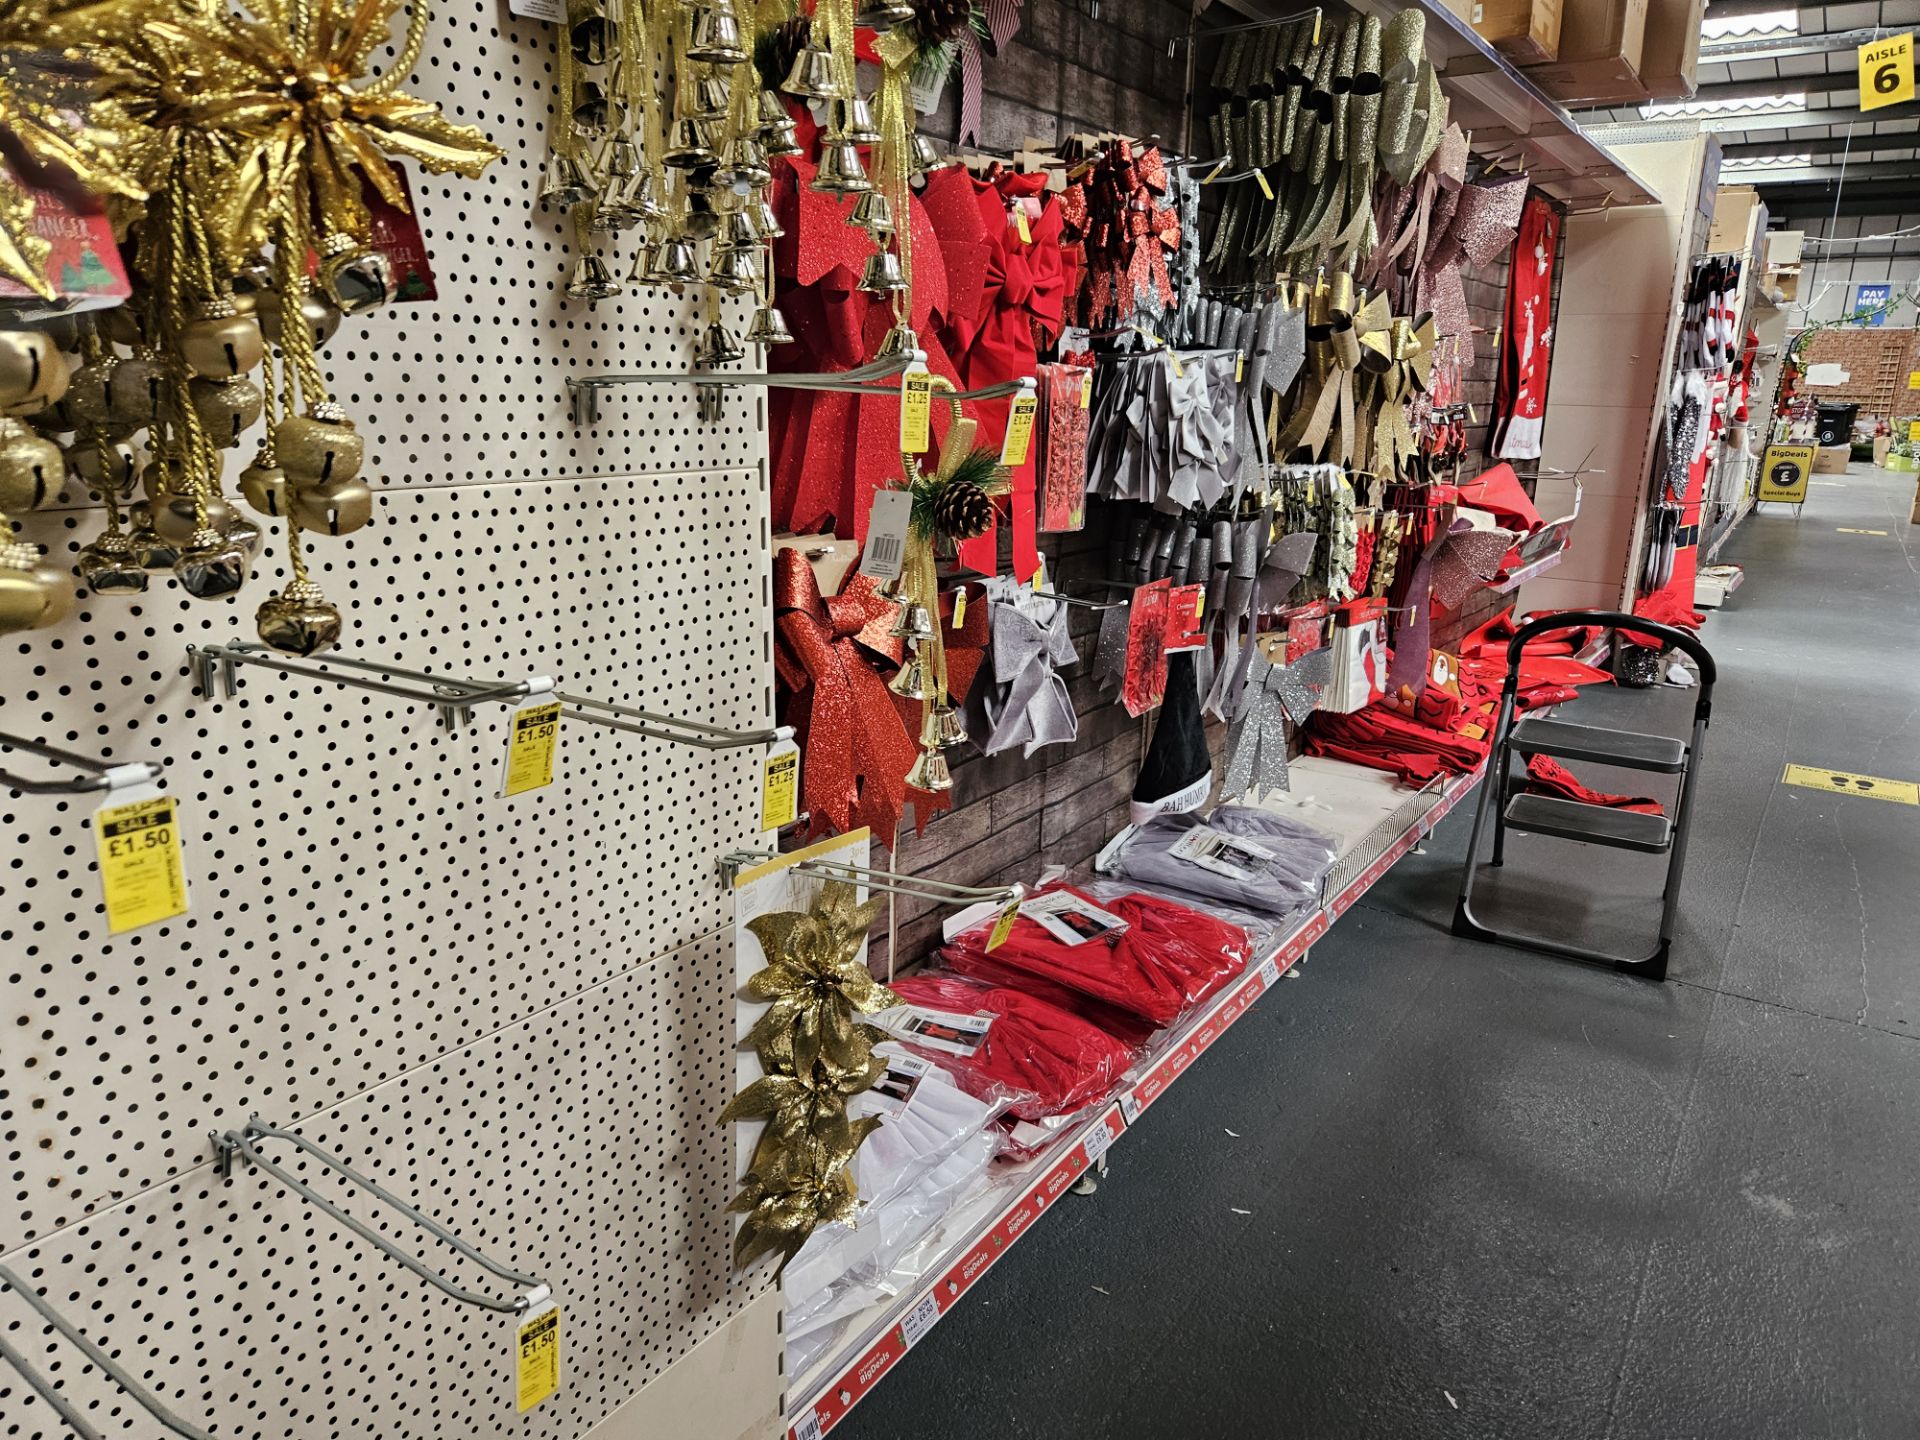 Aisle of Christmas bows & stockings. Shelving not included.